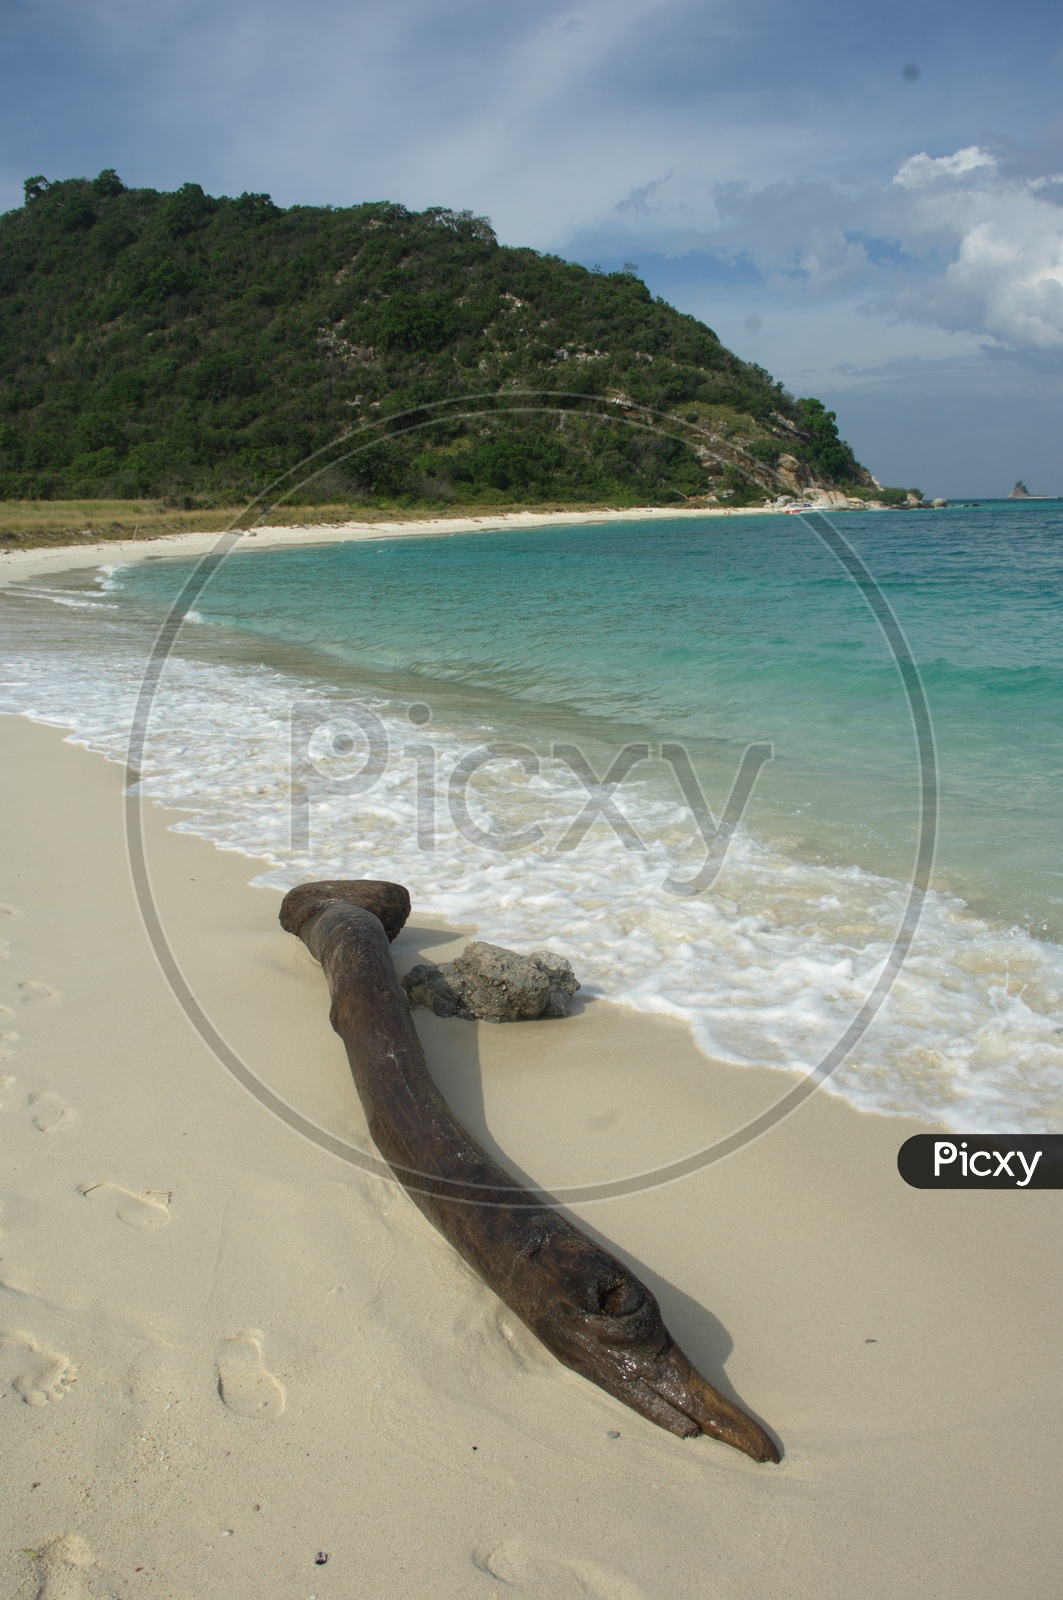 A wooden Log on the beach shore